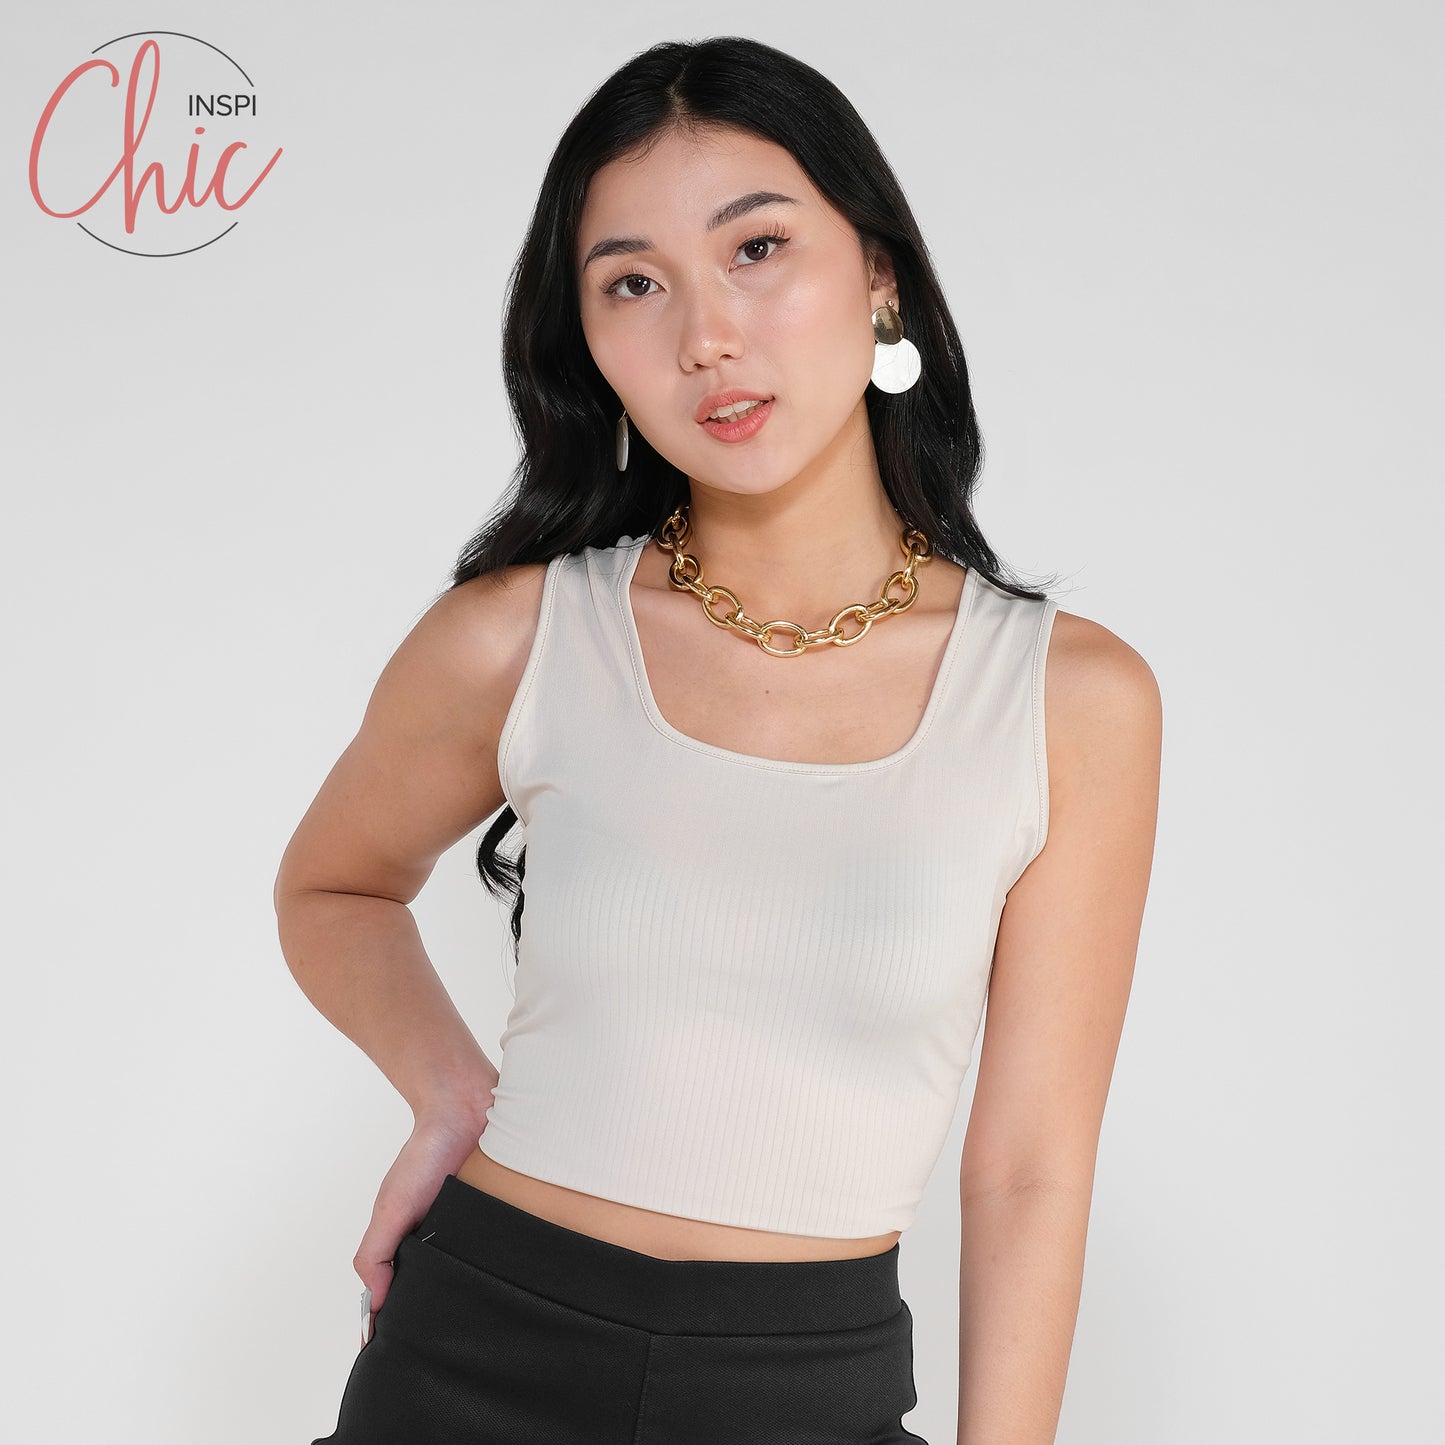 INSPI Chic Color Me Ribbed Thick Strap Croptop Shirt for Women Sleeveless Top